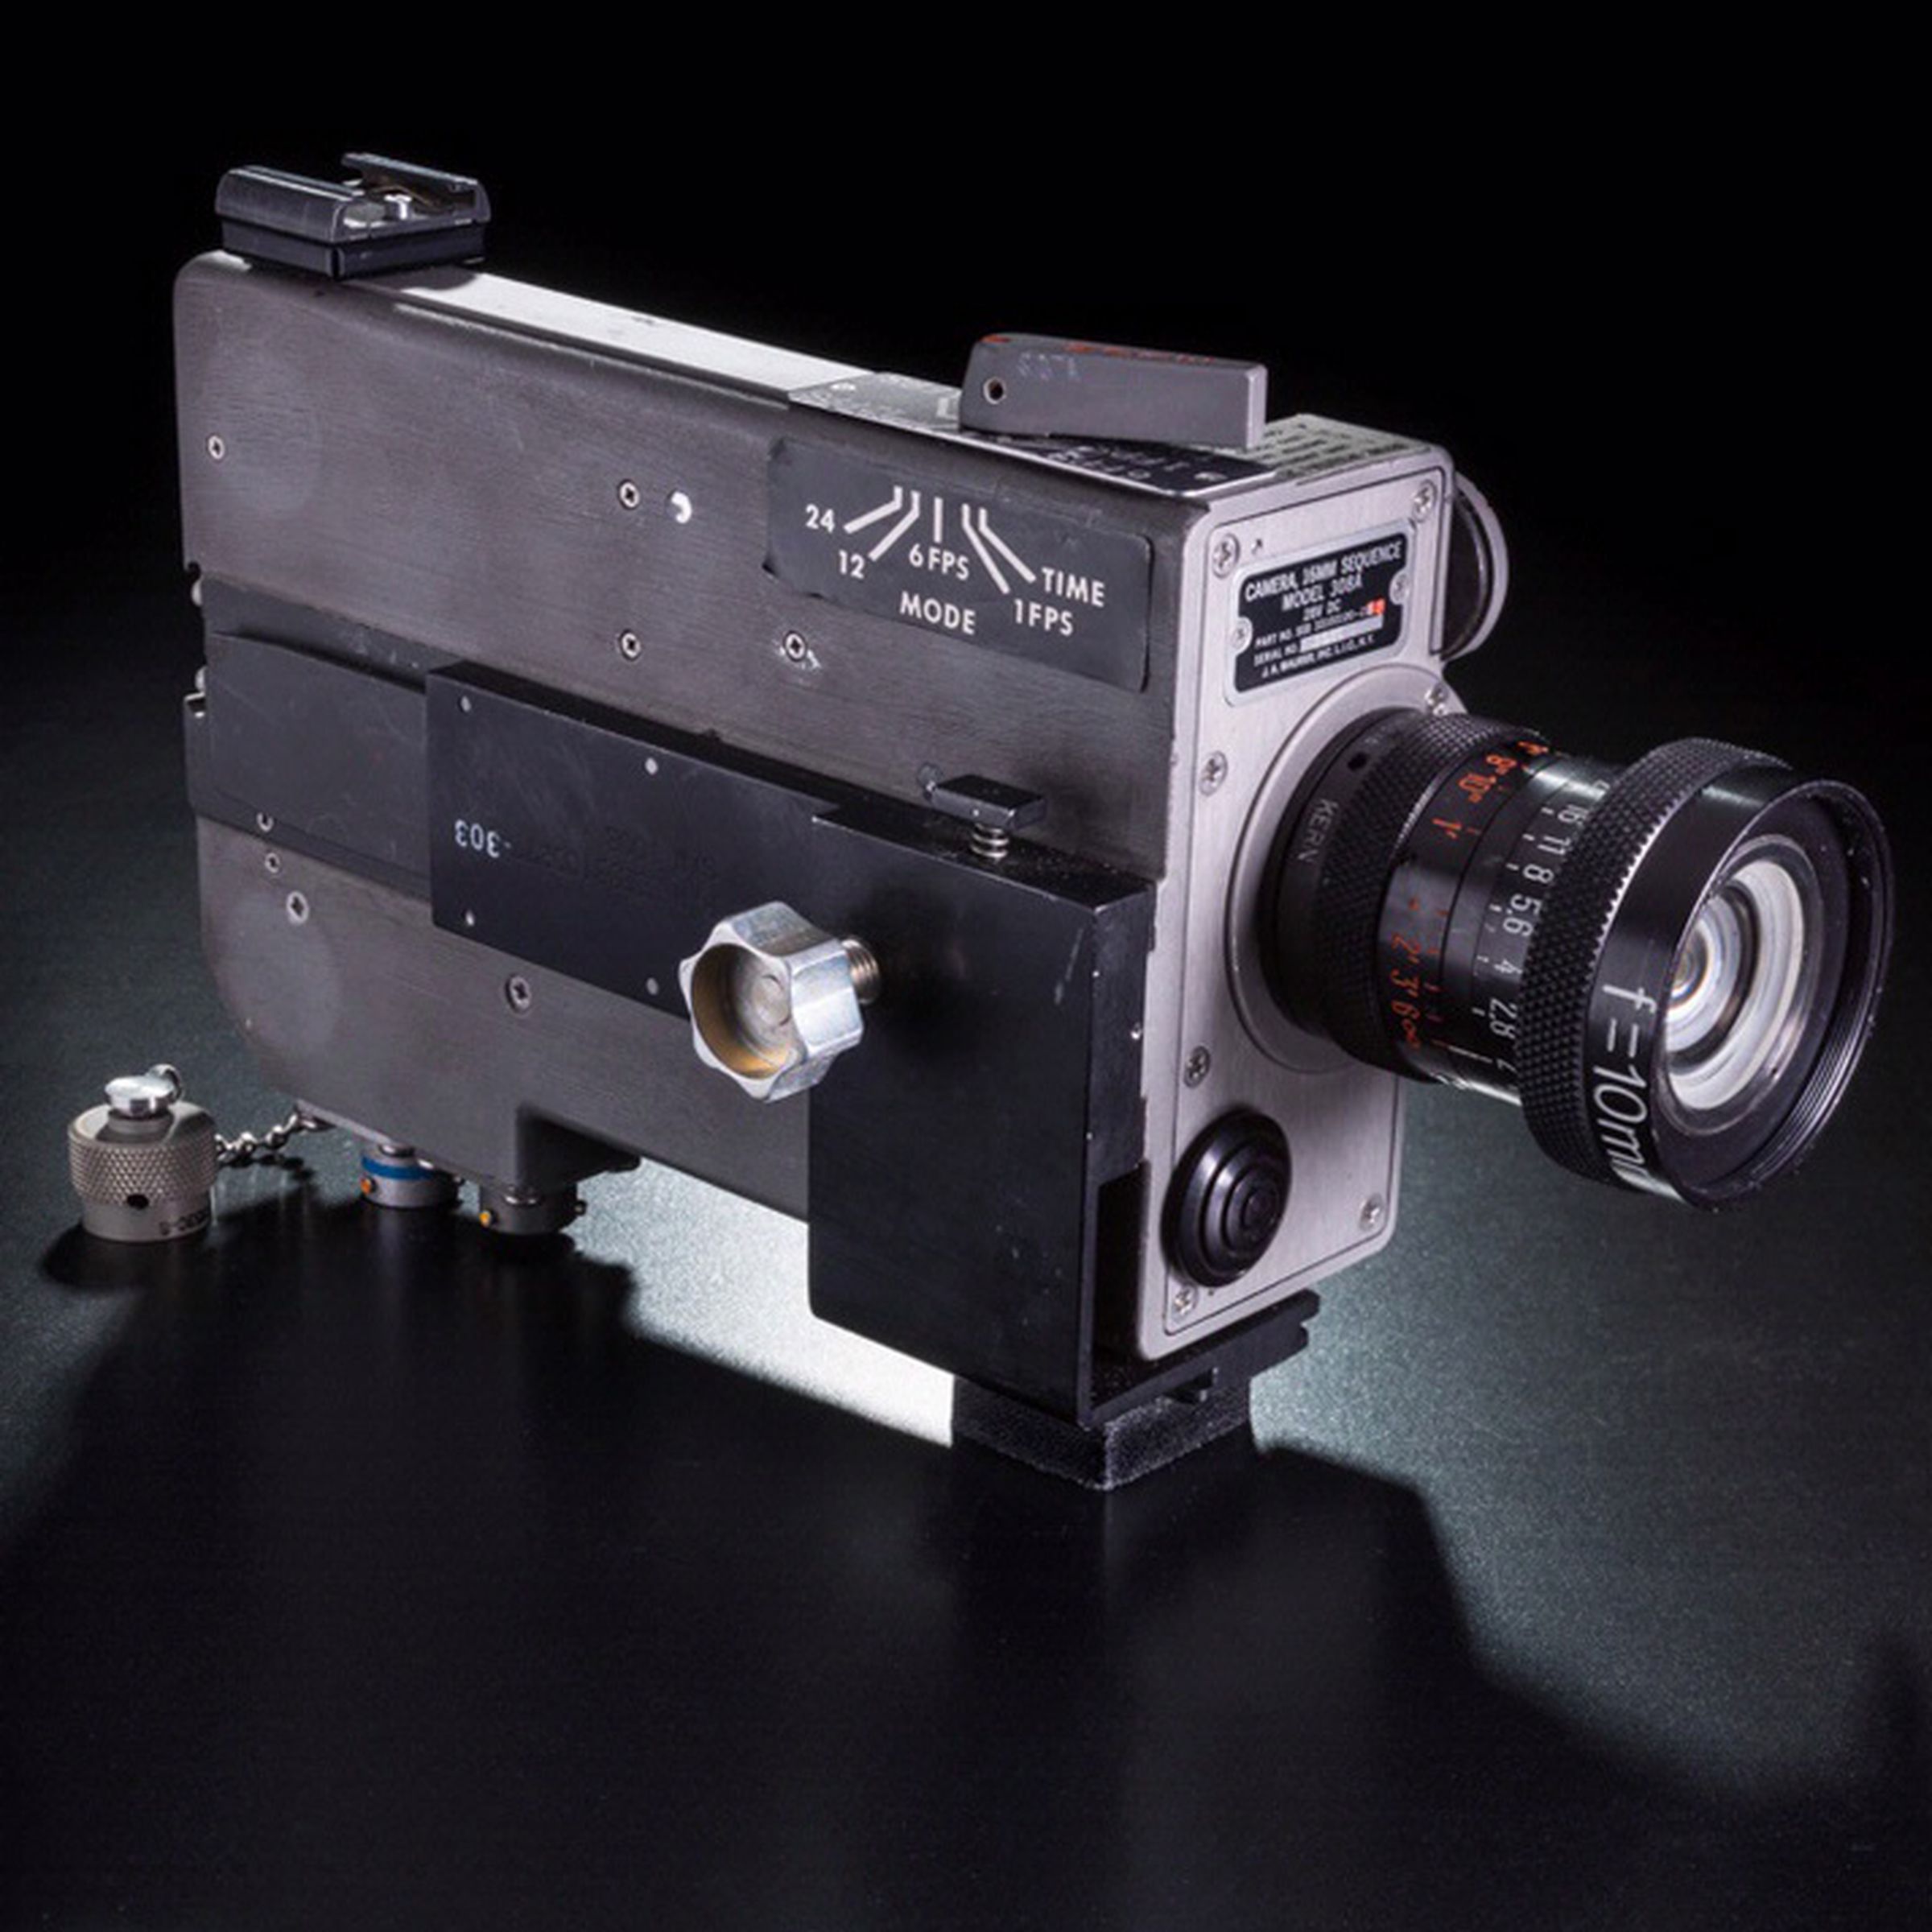 A never-before-seen 16mm Data Acquisition Camera used on the Apollo 11 missions.